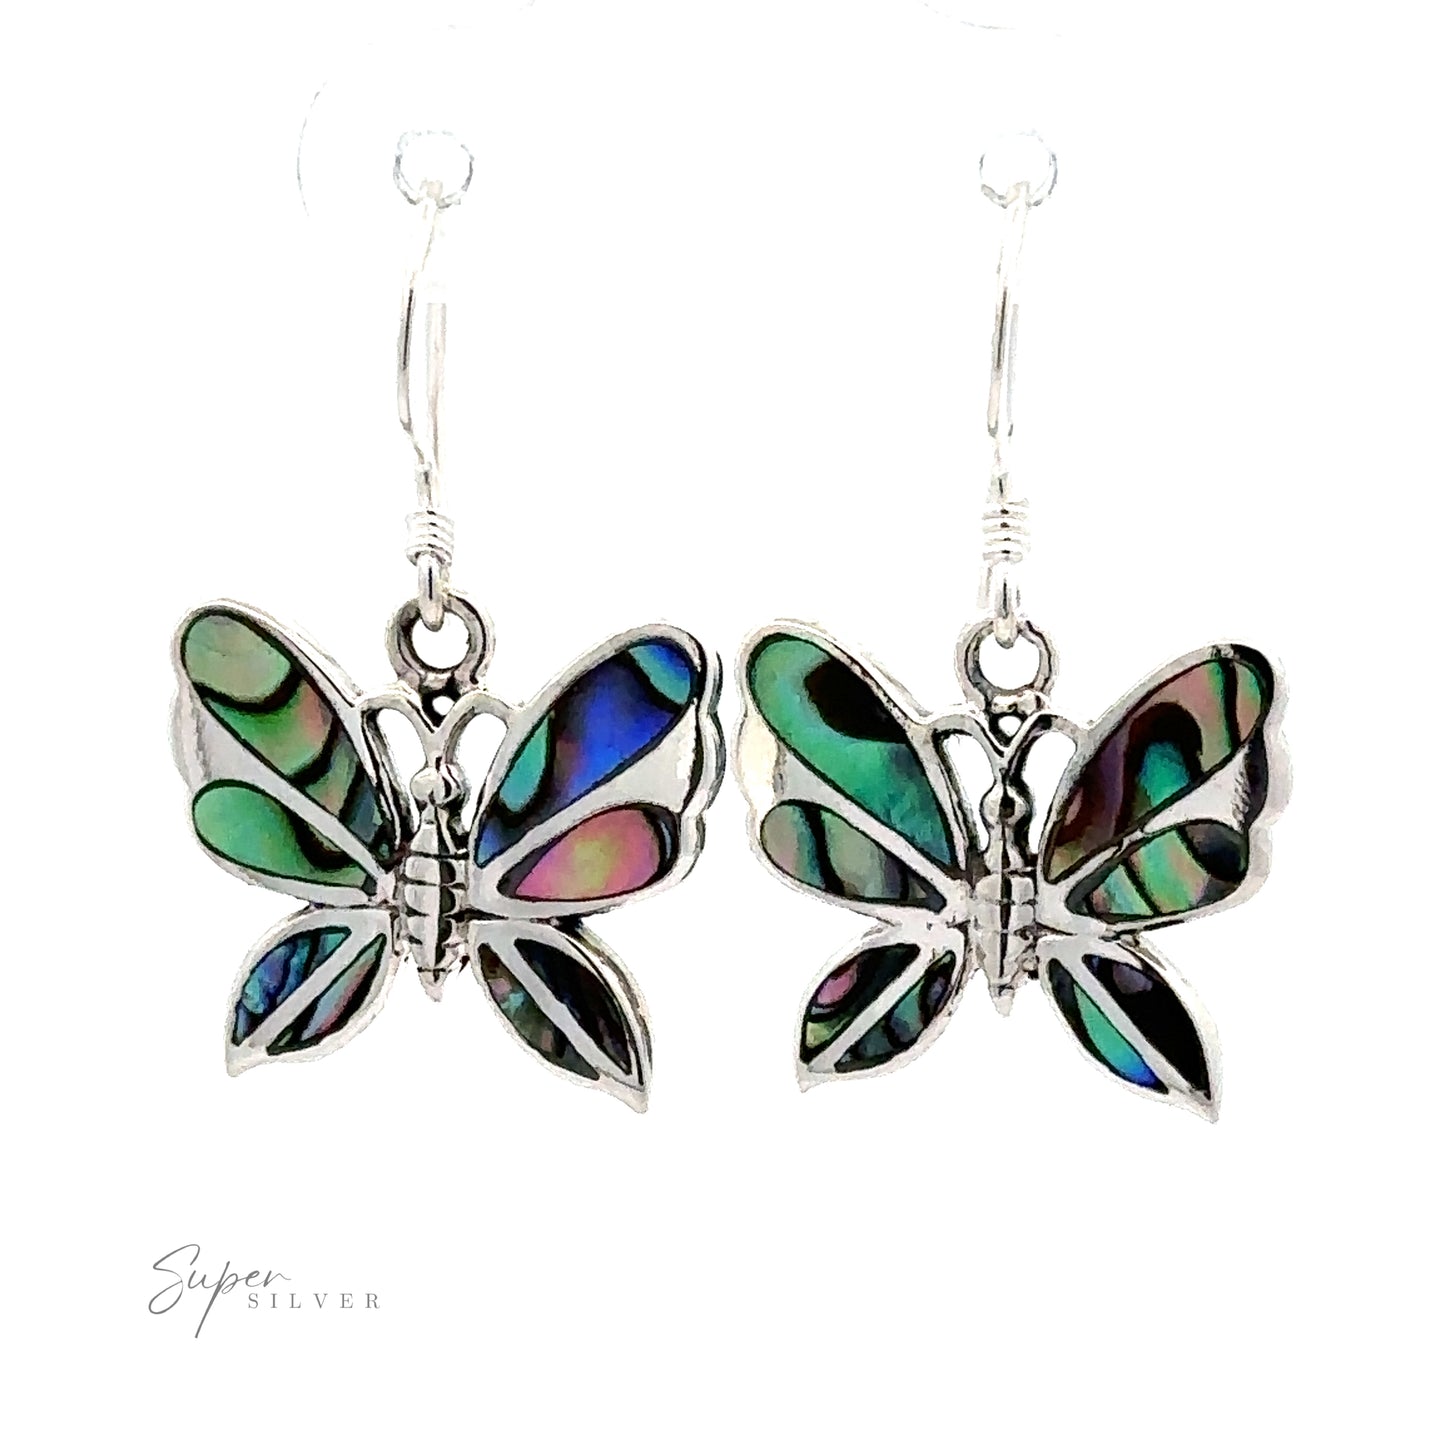 A pair of Abalone Butterfly Earrings with multicolored inlays and .925 Sterling Silver outlines, displayed against a white background.